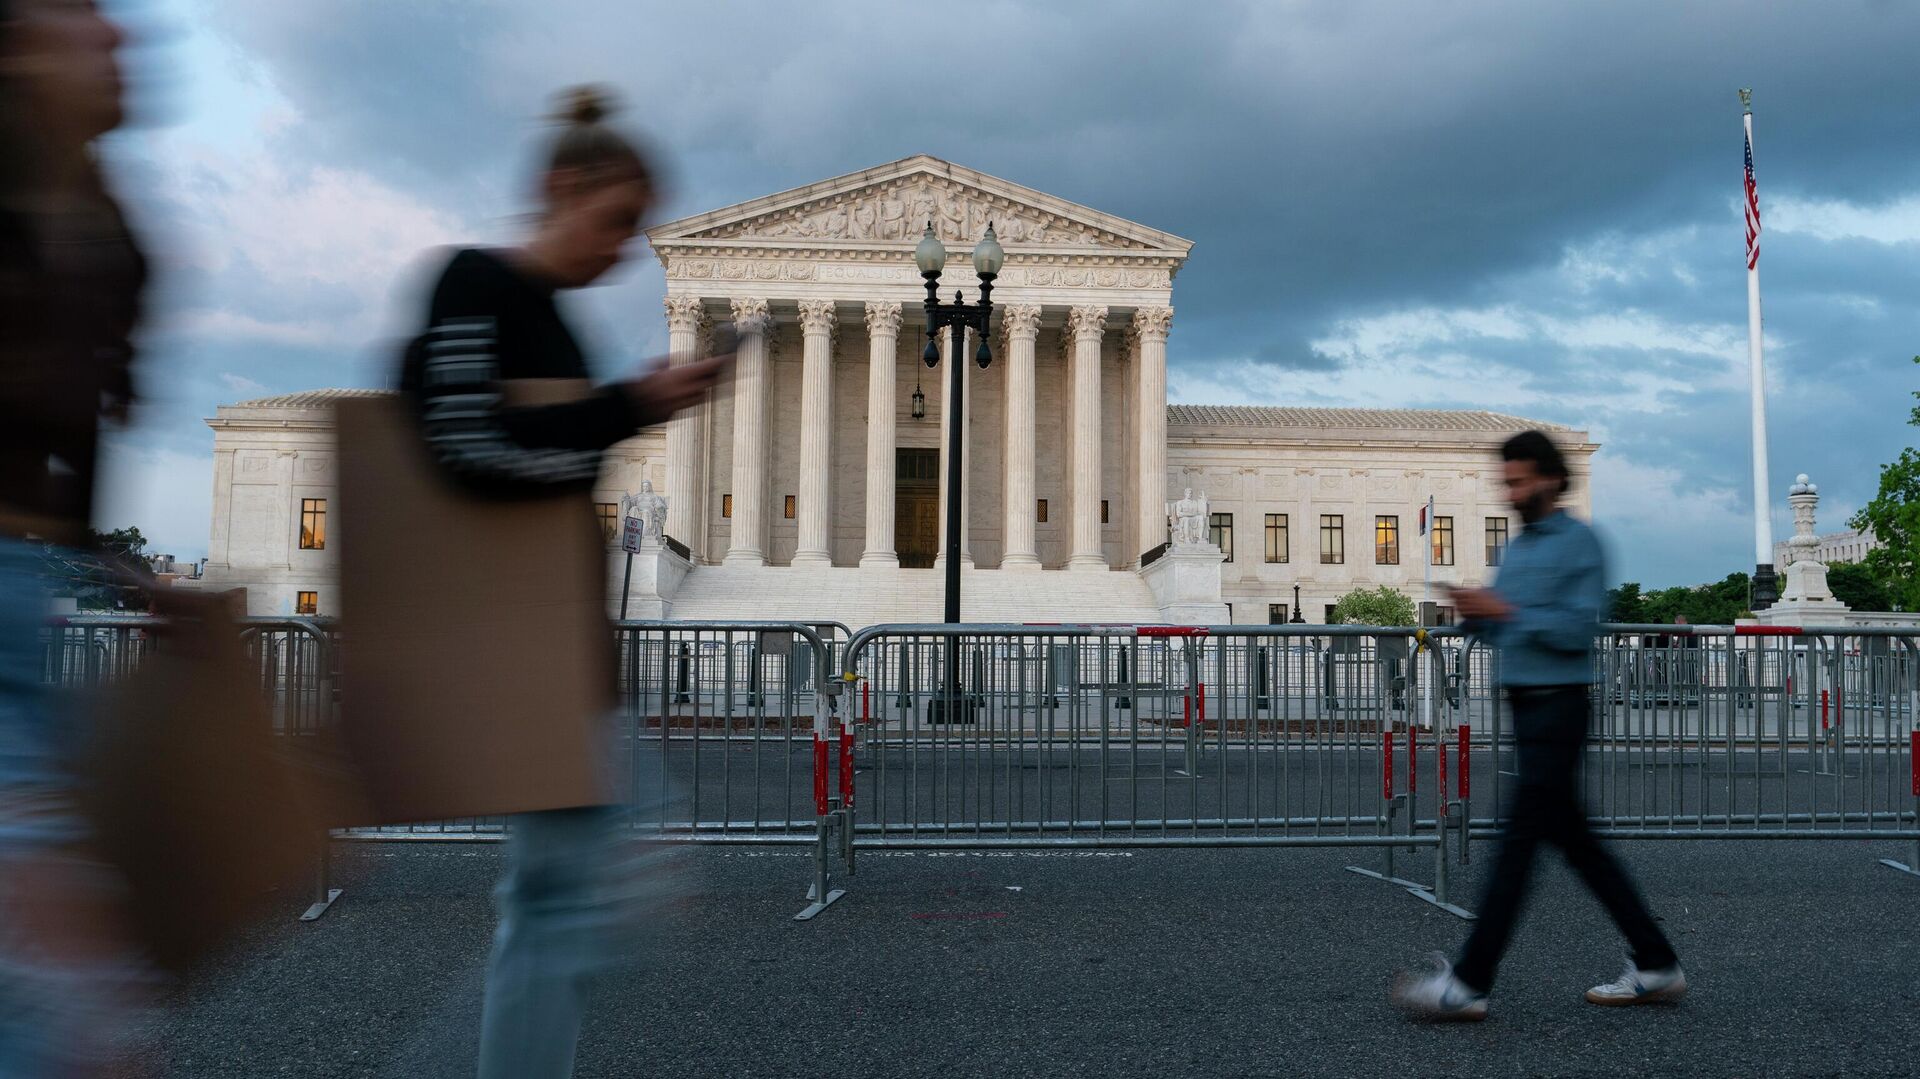 The U.S. Supreme Court building is shown as people walk past, Wednesday, May 4, 2022 in Washington. A draft opinion suggests the U.S. Supreme Court could be poised to overturn the landmark 1973 Roe v. Wade case that legalized abortion nationwide, according to a Politico report released Monday - Sputnik International, 1920, 02.06.2022